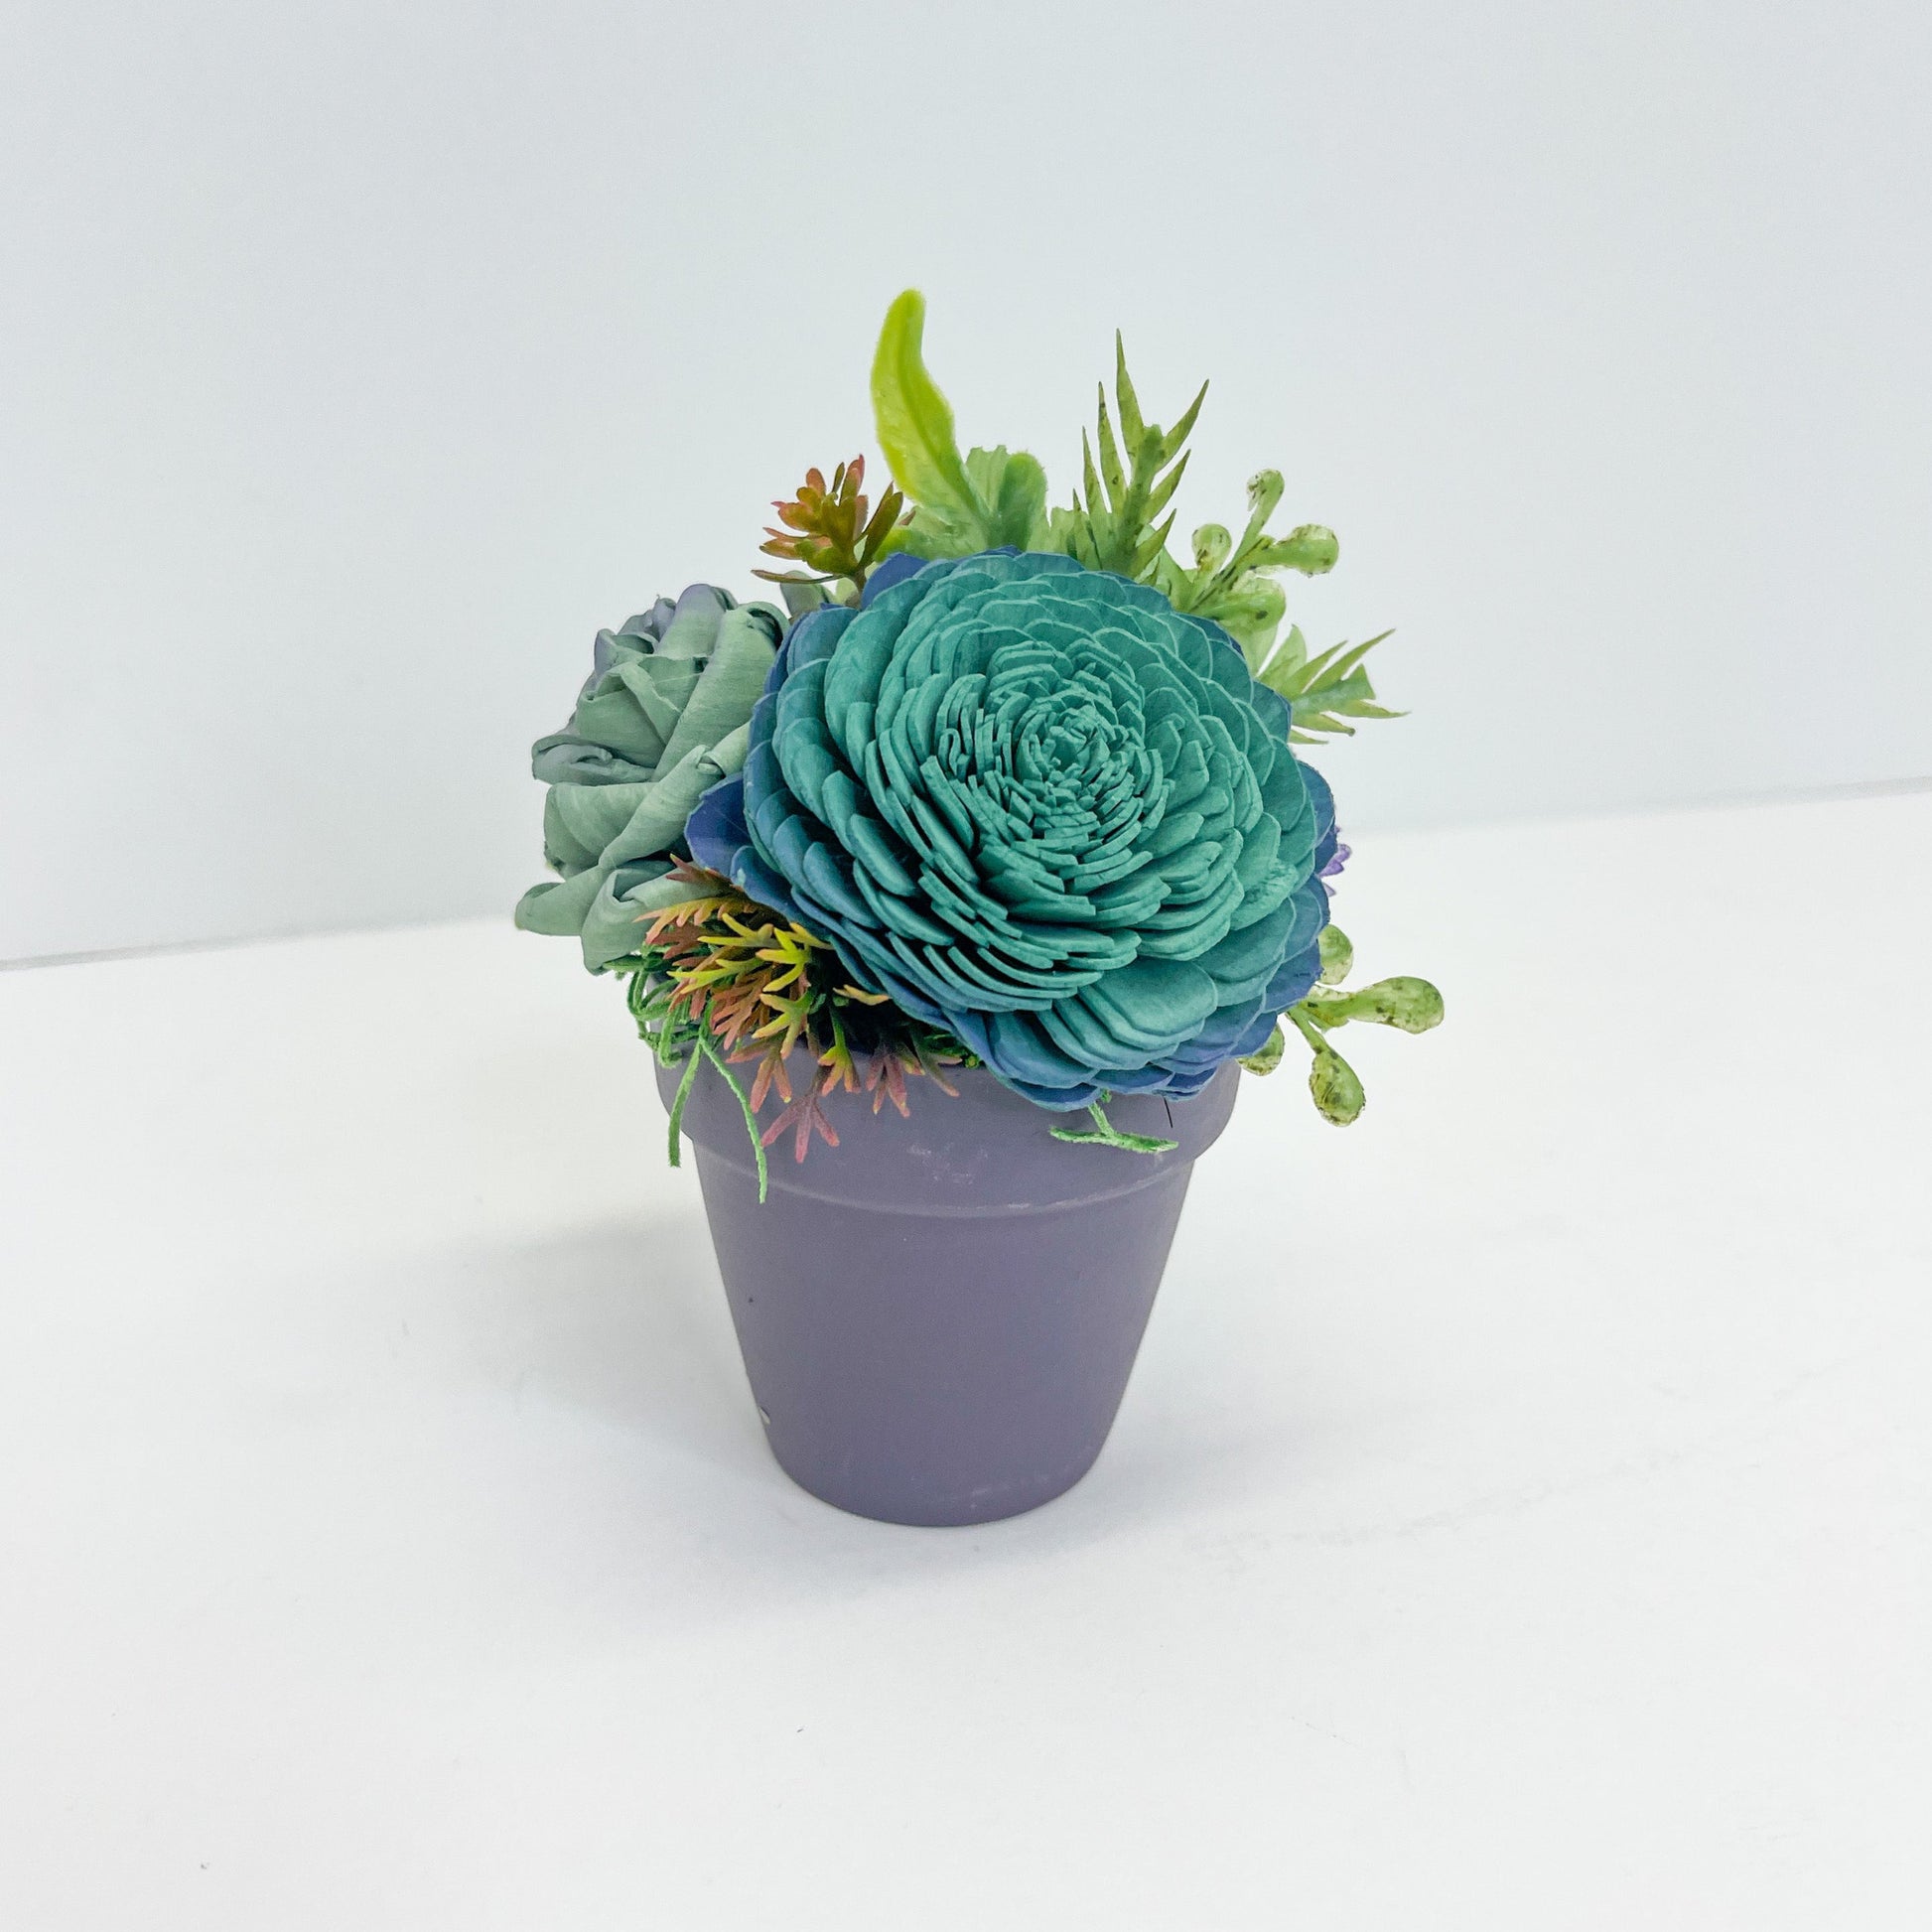 Blue and green wooden succulent with greenery placed in a painted purple pot.